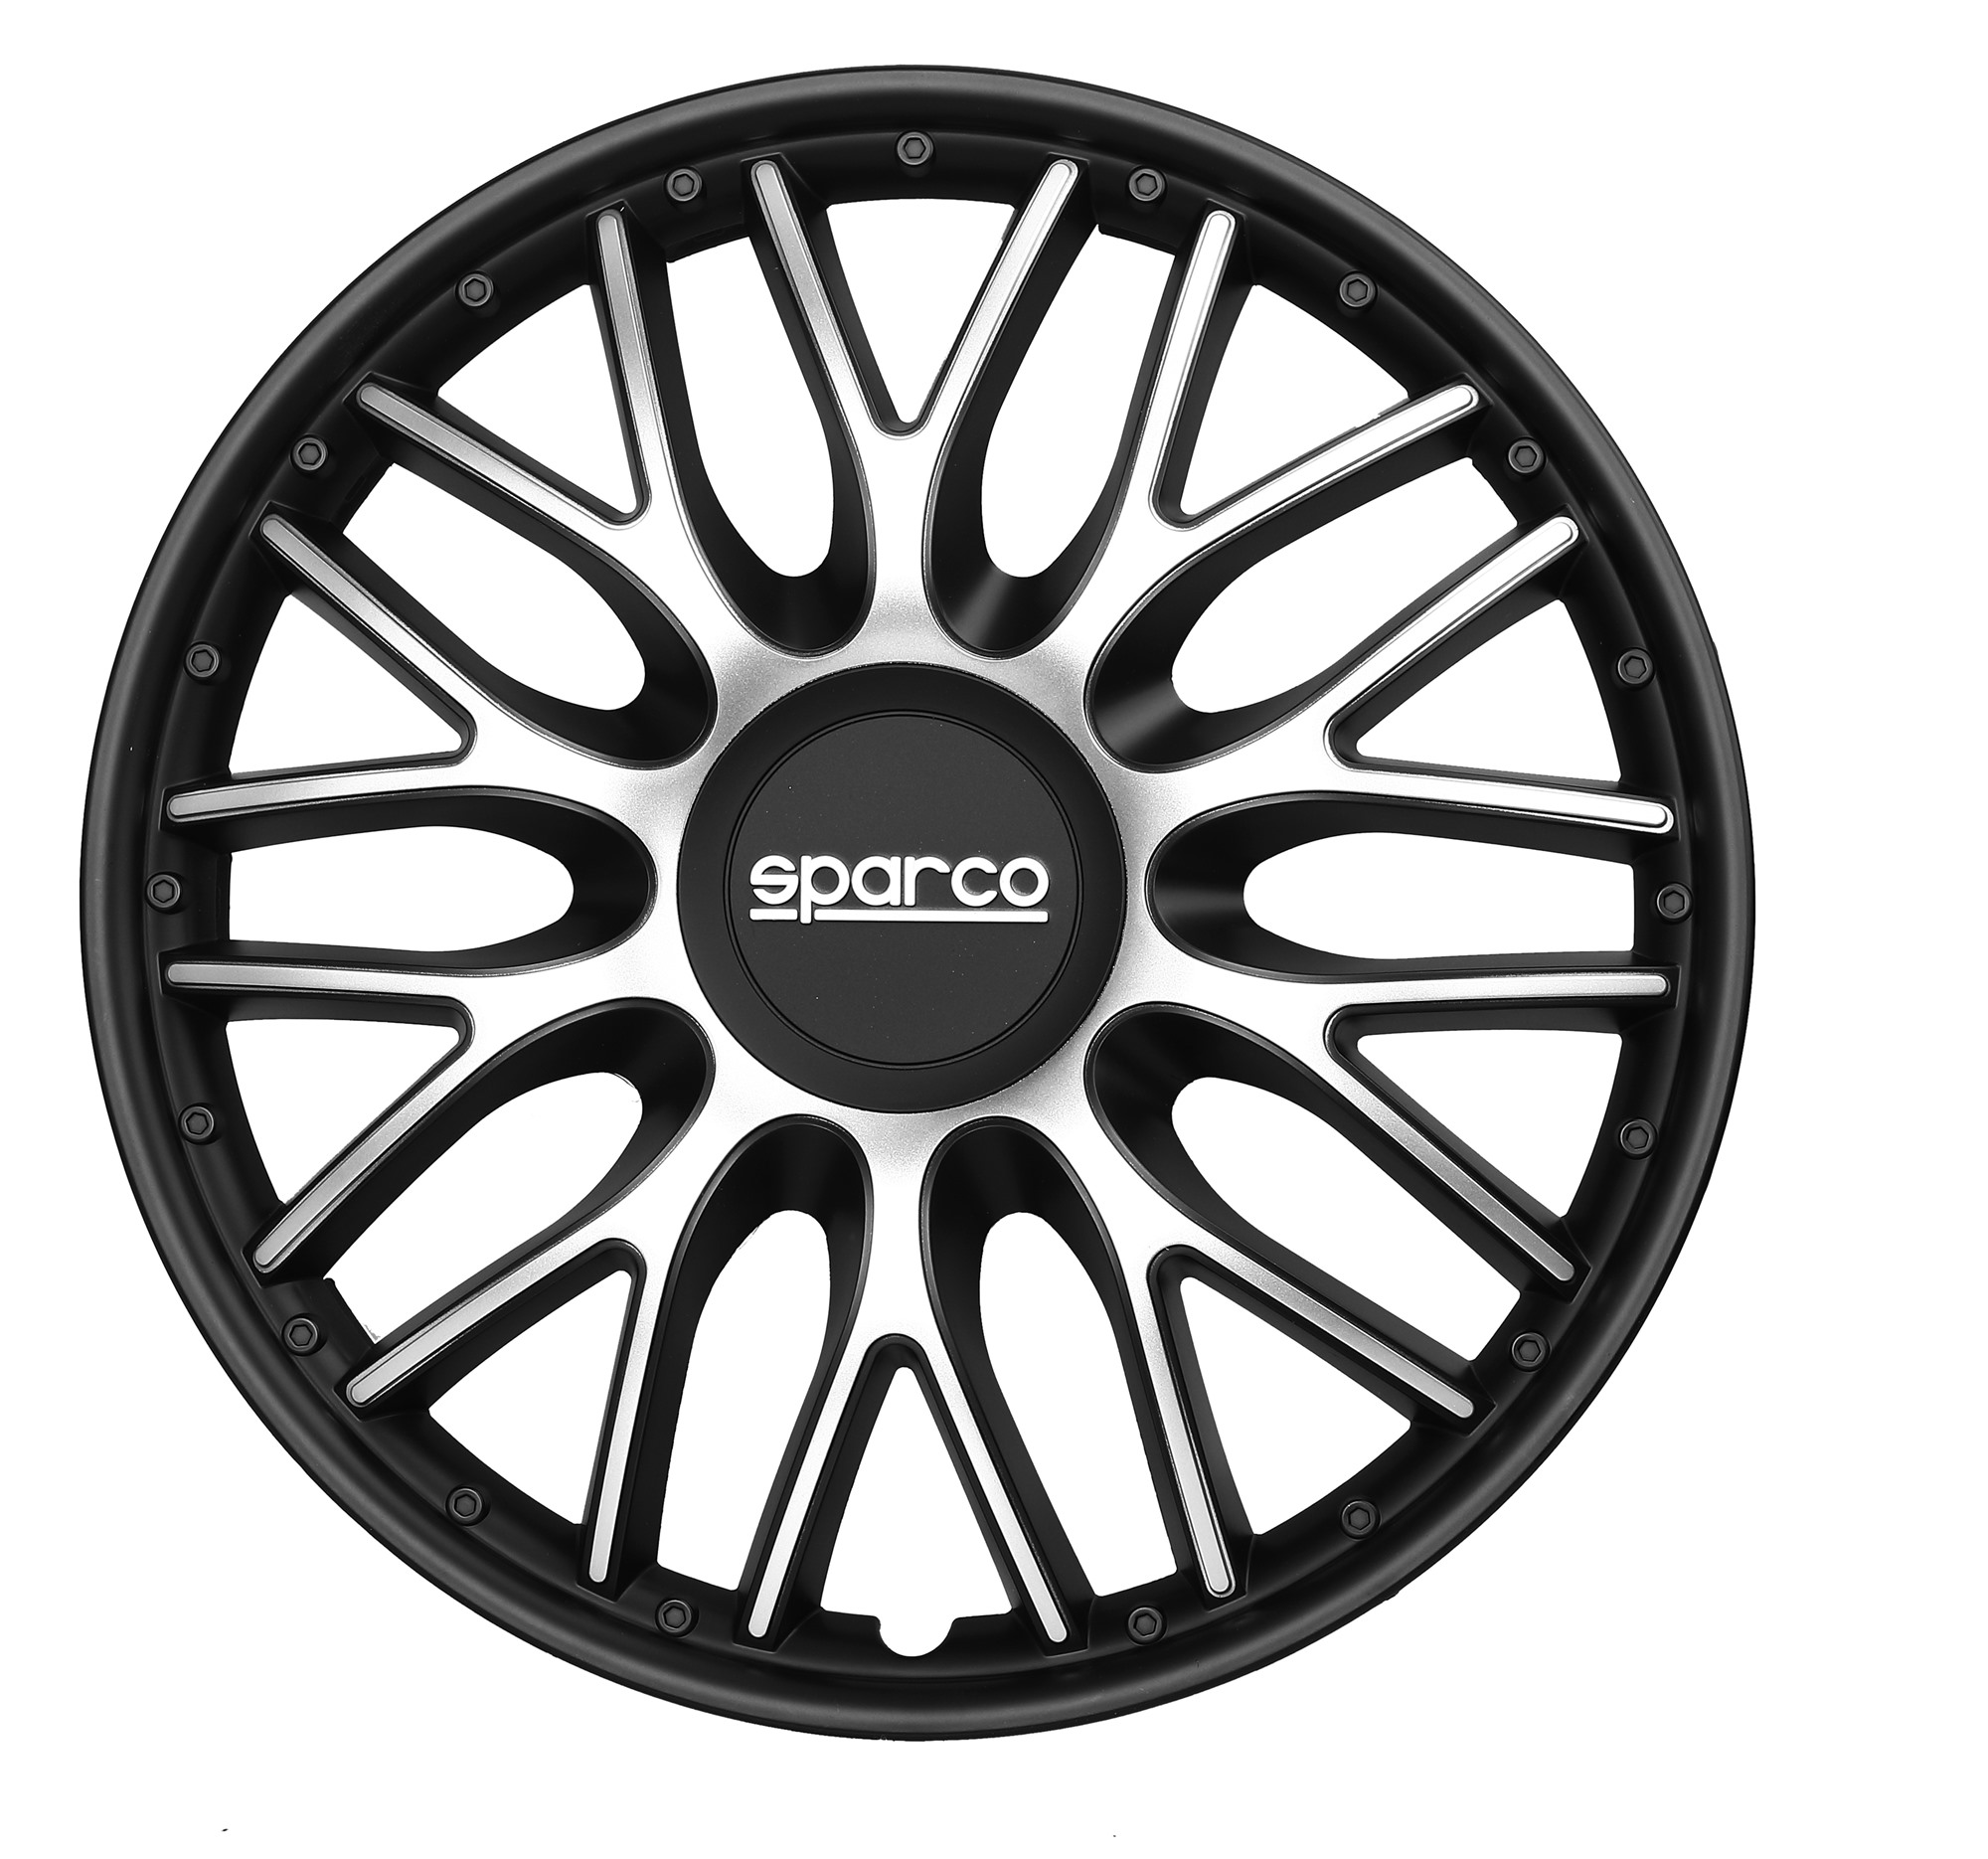 Wheel covers Roma silver-black 4pcs Sparco